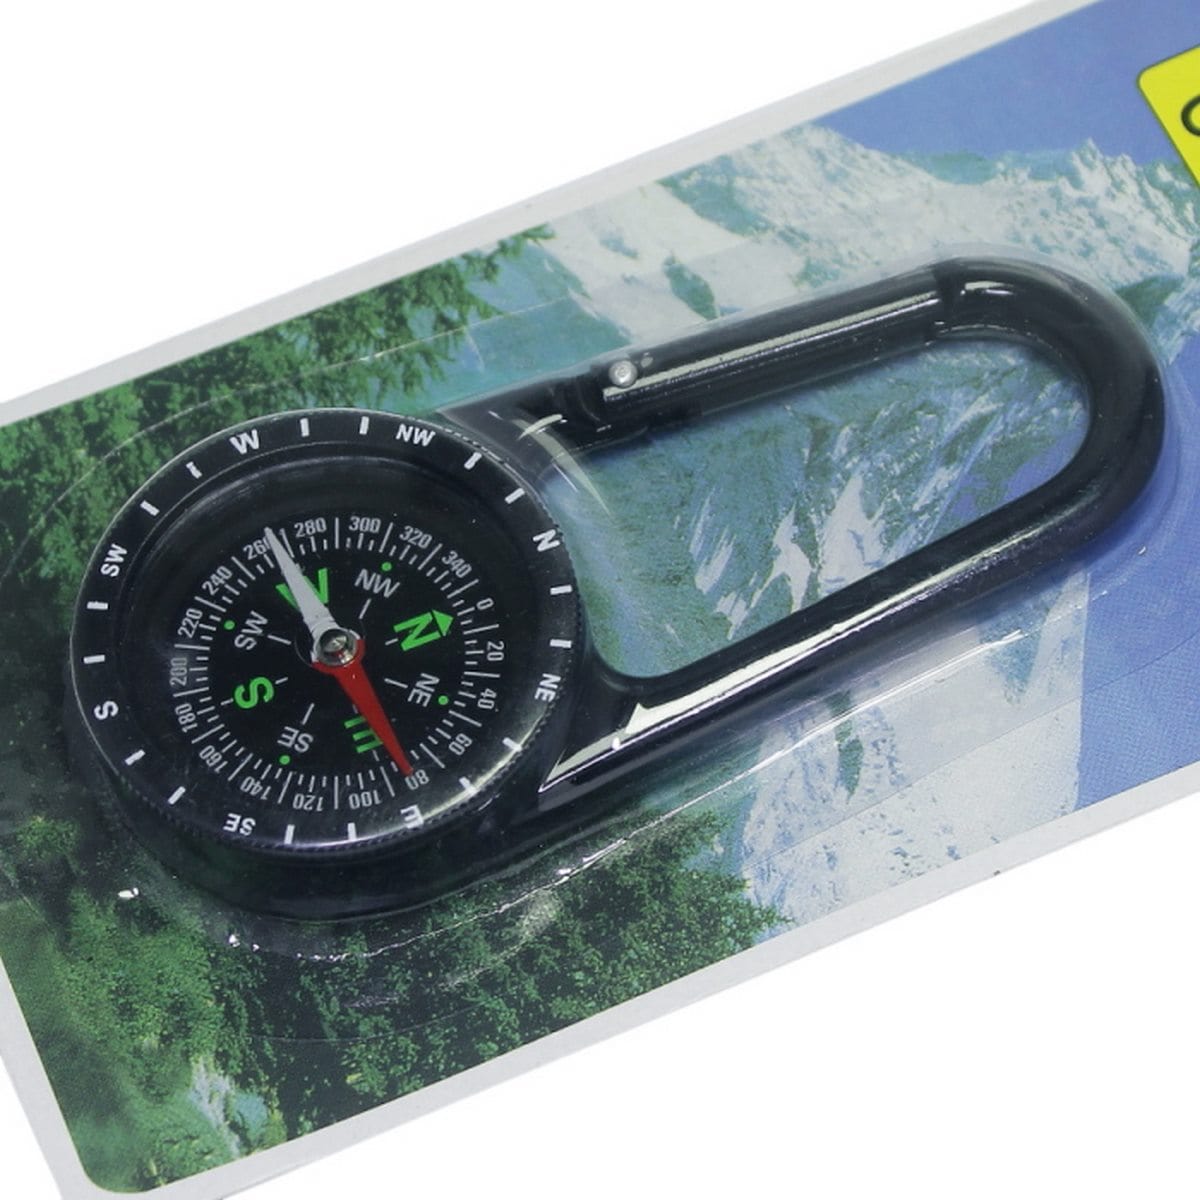 jags-mumbai Corporate Gift set Magnetic Compass 2in1